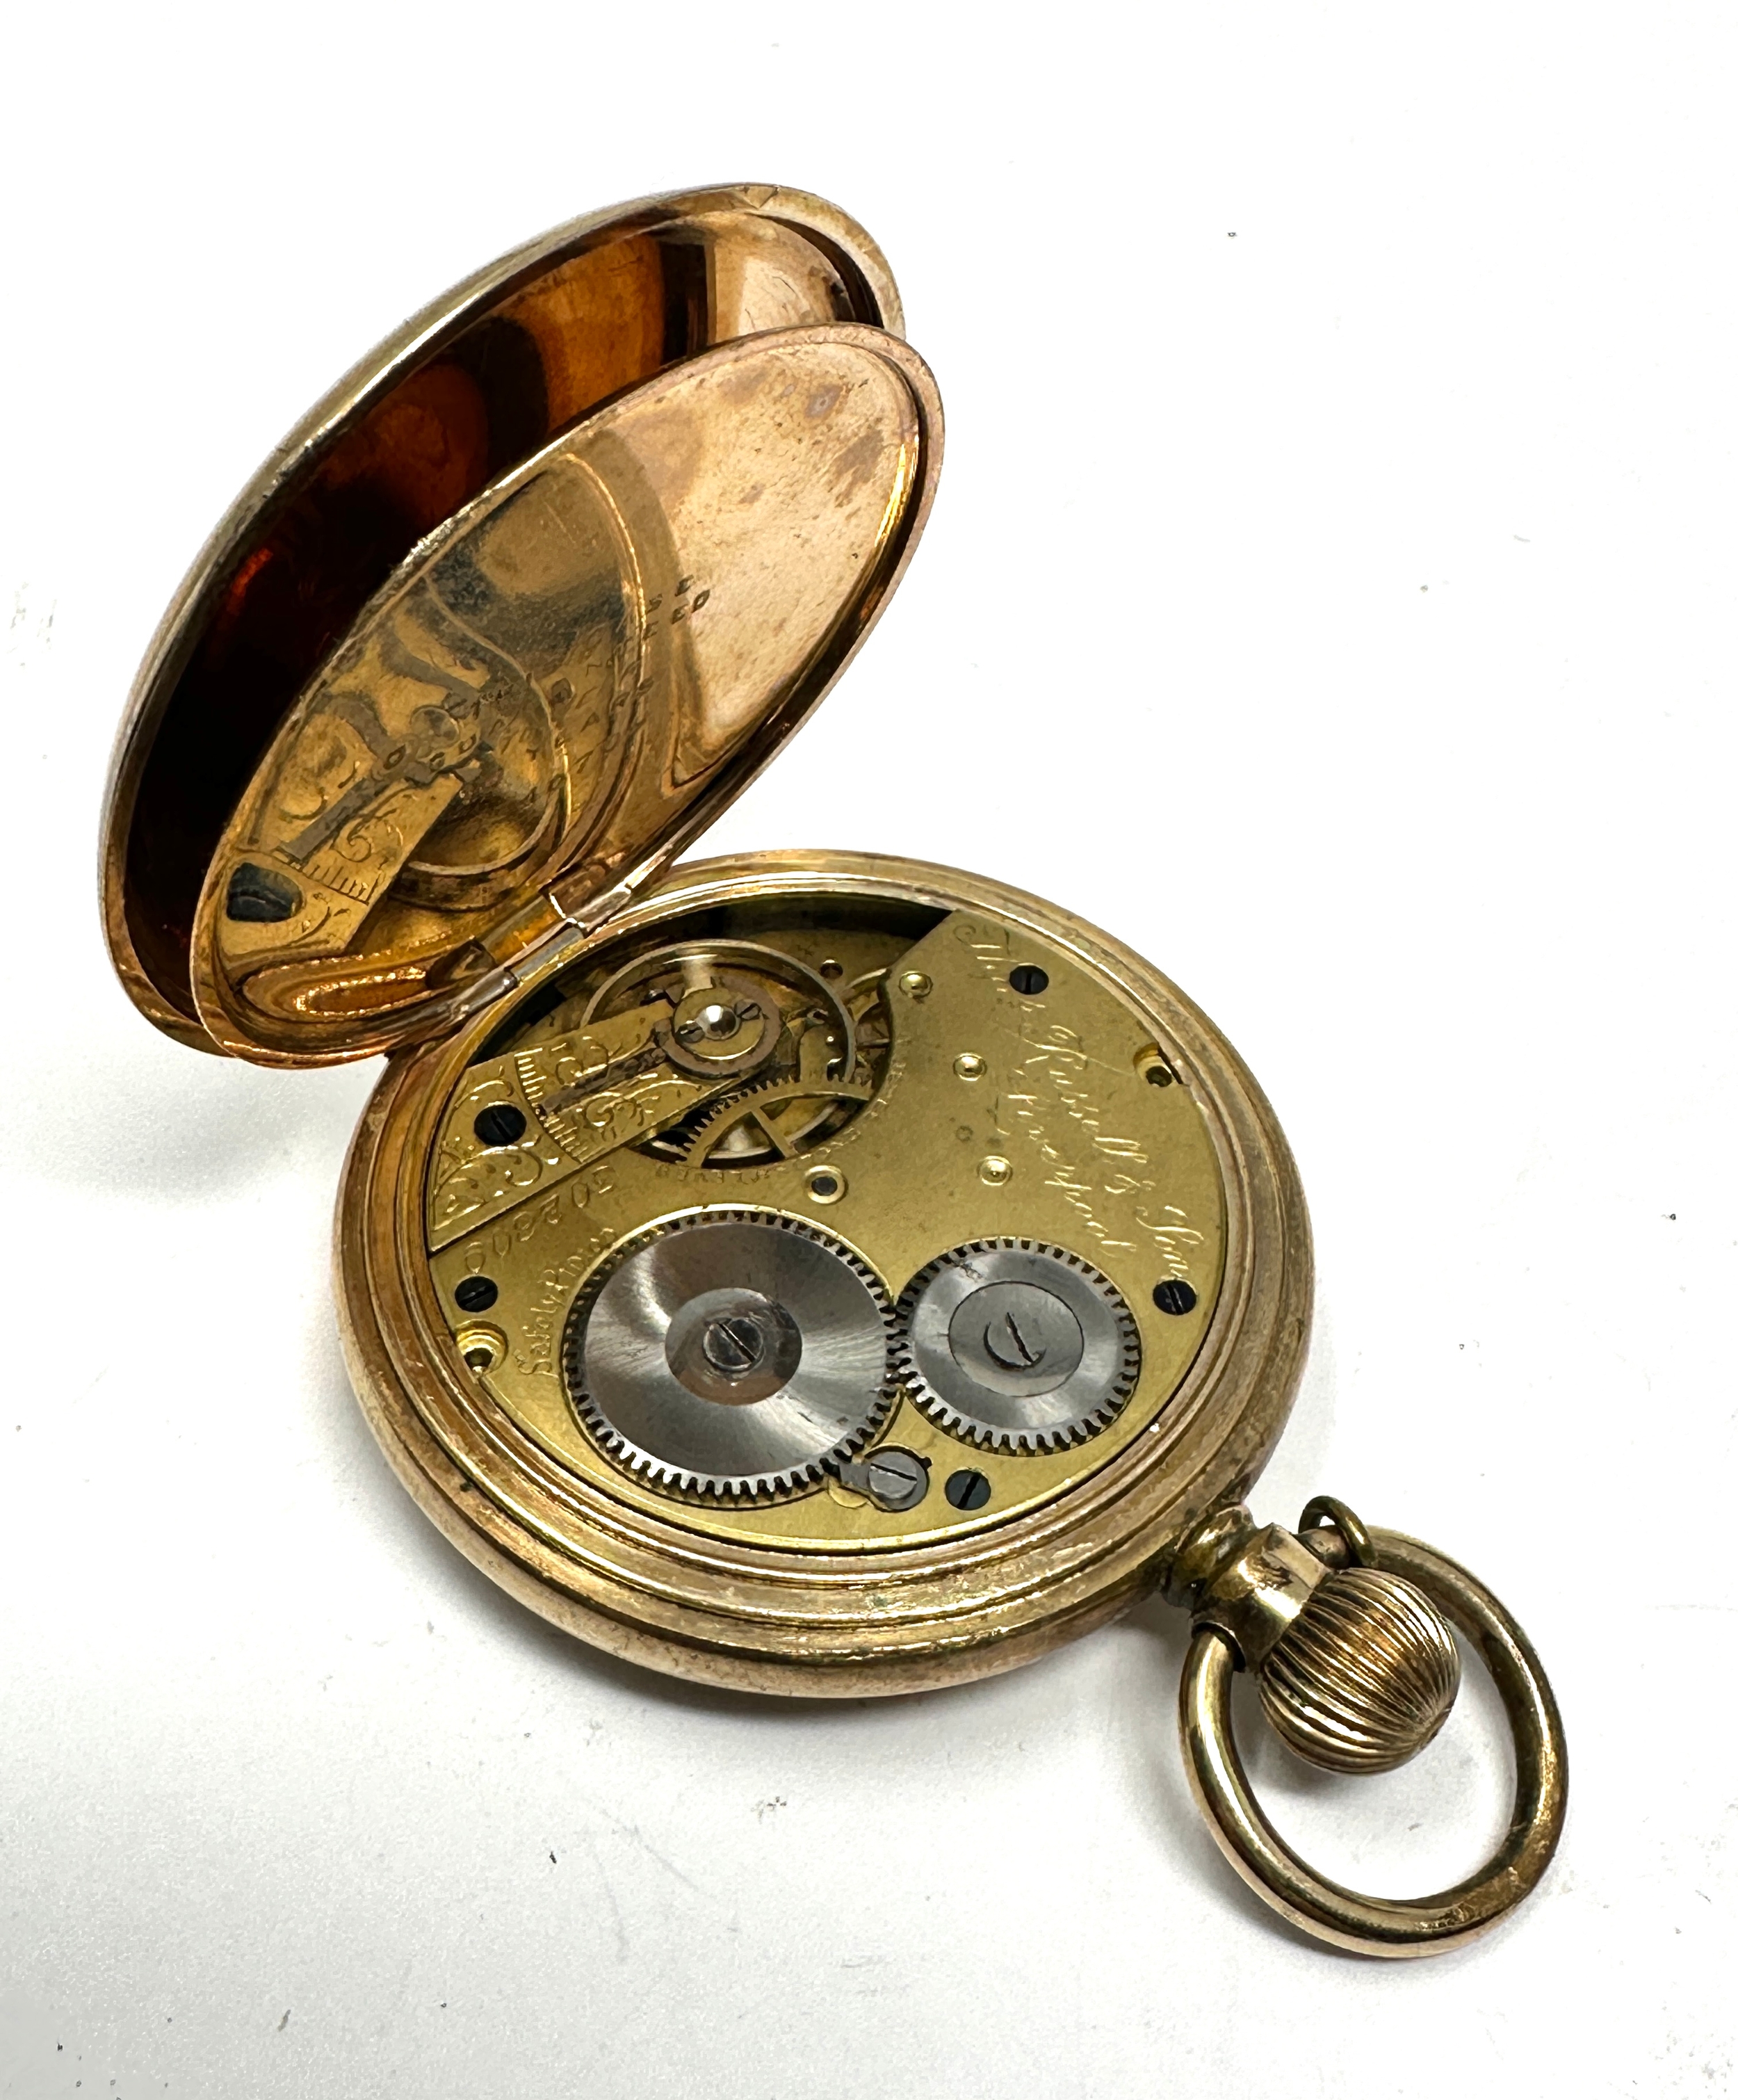 gold plate full hunter tho russell pocket watch the watch is ticking - Image 3 of 3